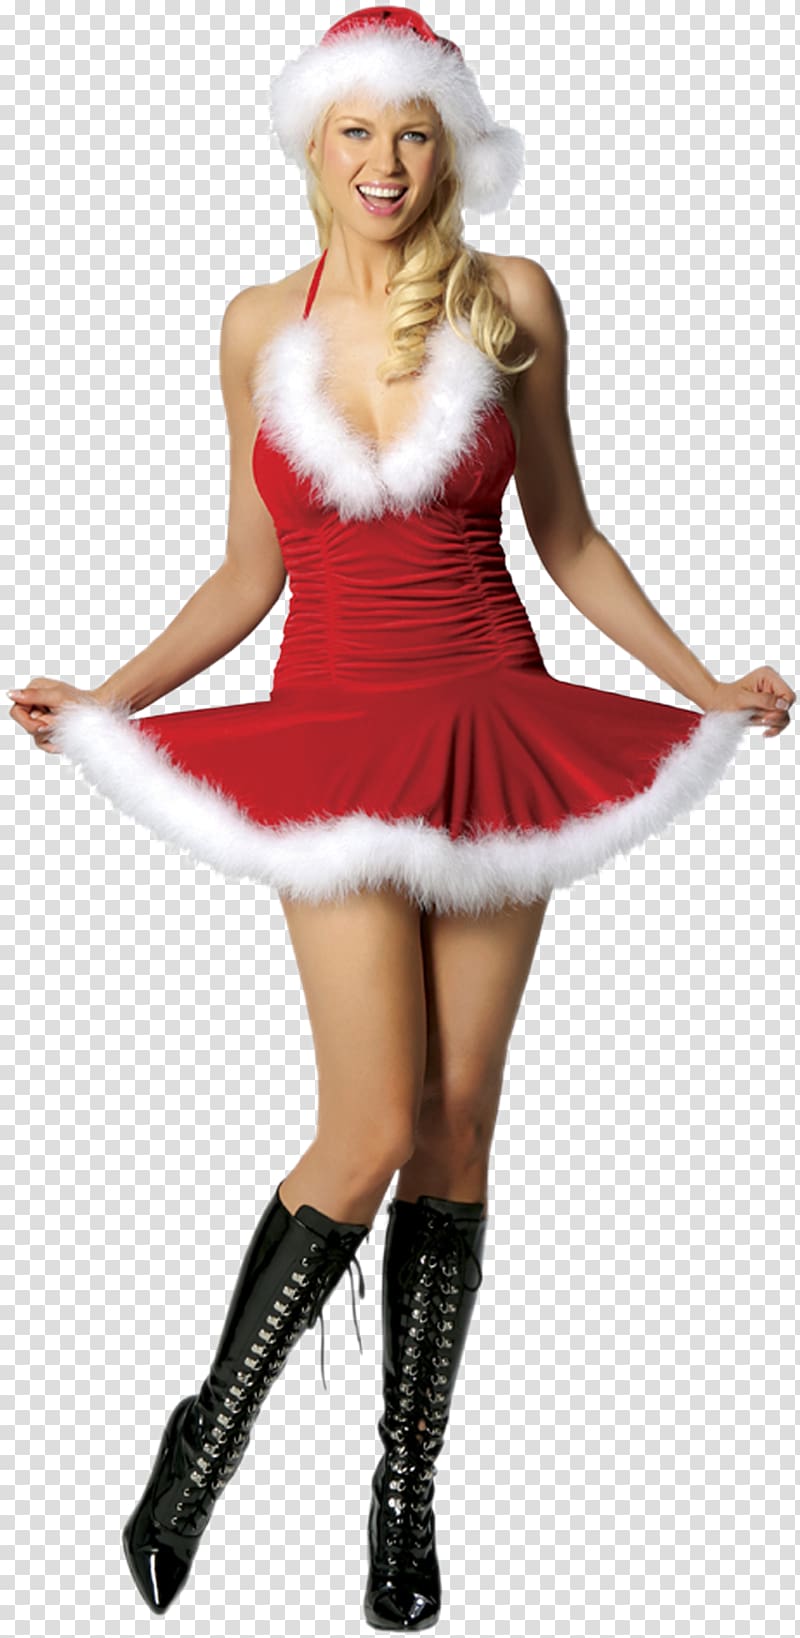 Snegurochka Ded Moroz Costume Clothing Fashion, girl transparent background PNG clipart